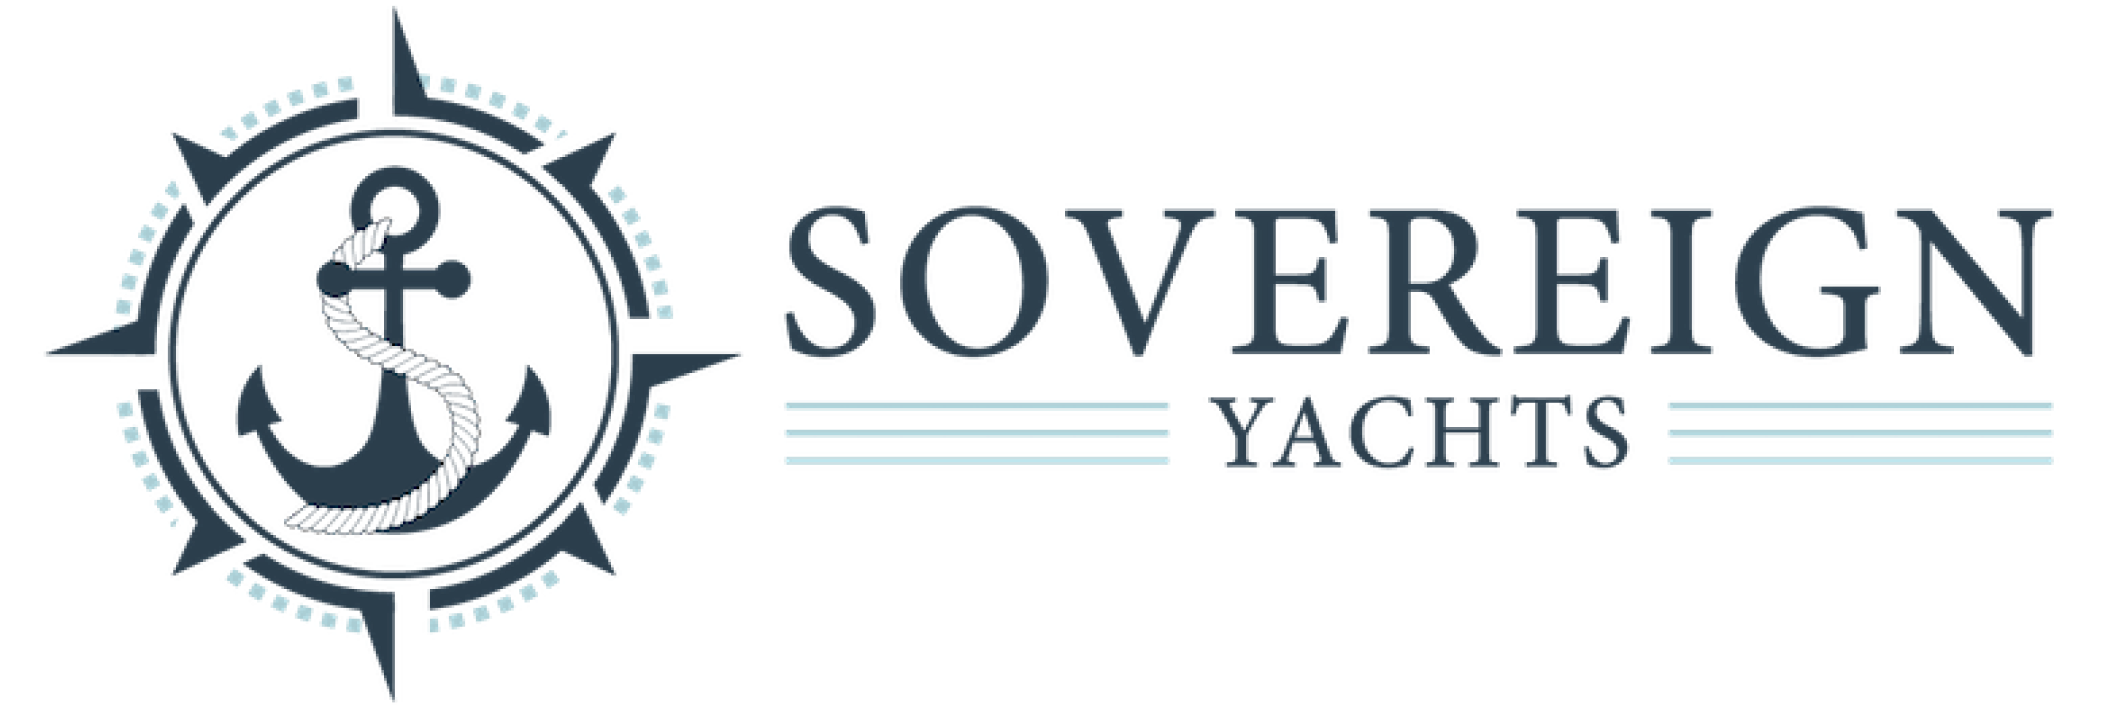 Sovereign Yacht Sales proudly serves Stuart & Palm Beach, FL and our neighbors in North River Shores, Sewall's Point, Juno Beach and Lake Park